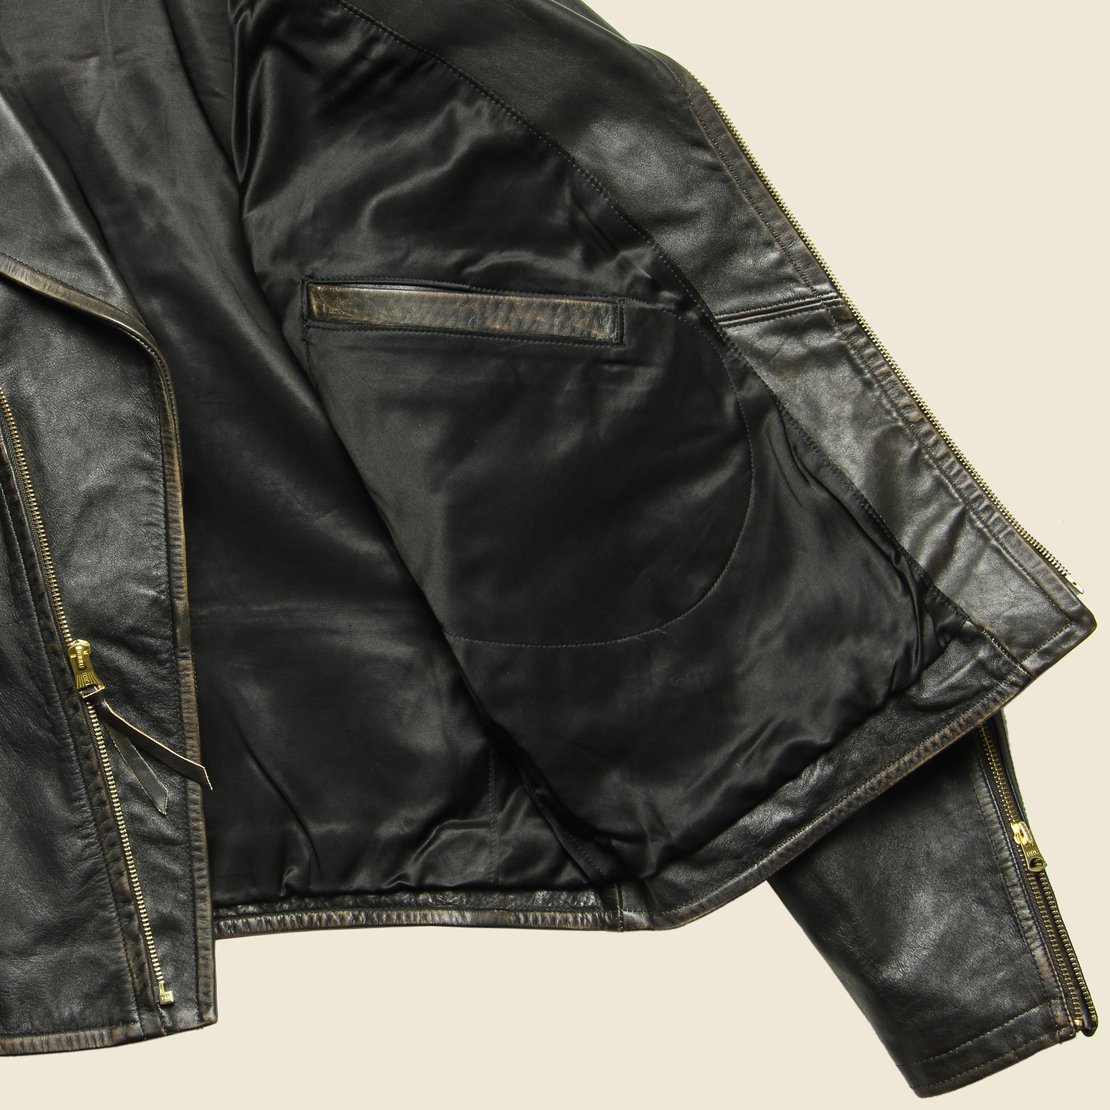 The "Lucky Tens" Hand-Painted Leather Jacket for STAG - RRL - STAG Provisions - Outerwear - Coat / Jacket